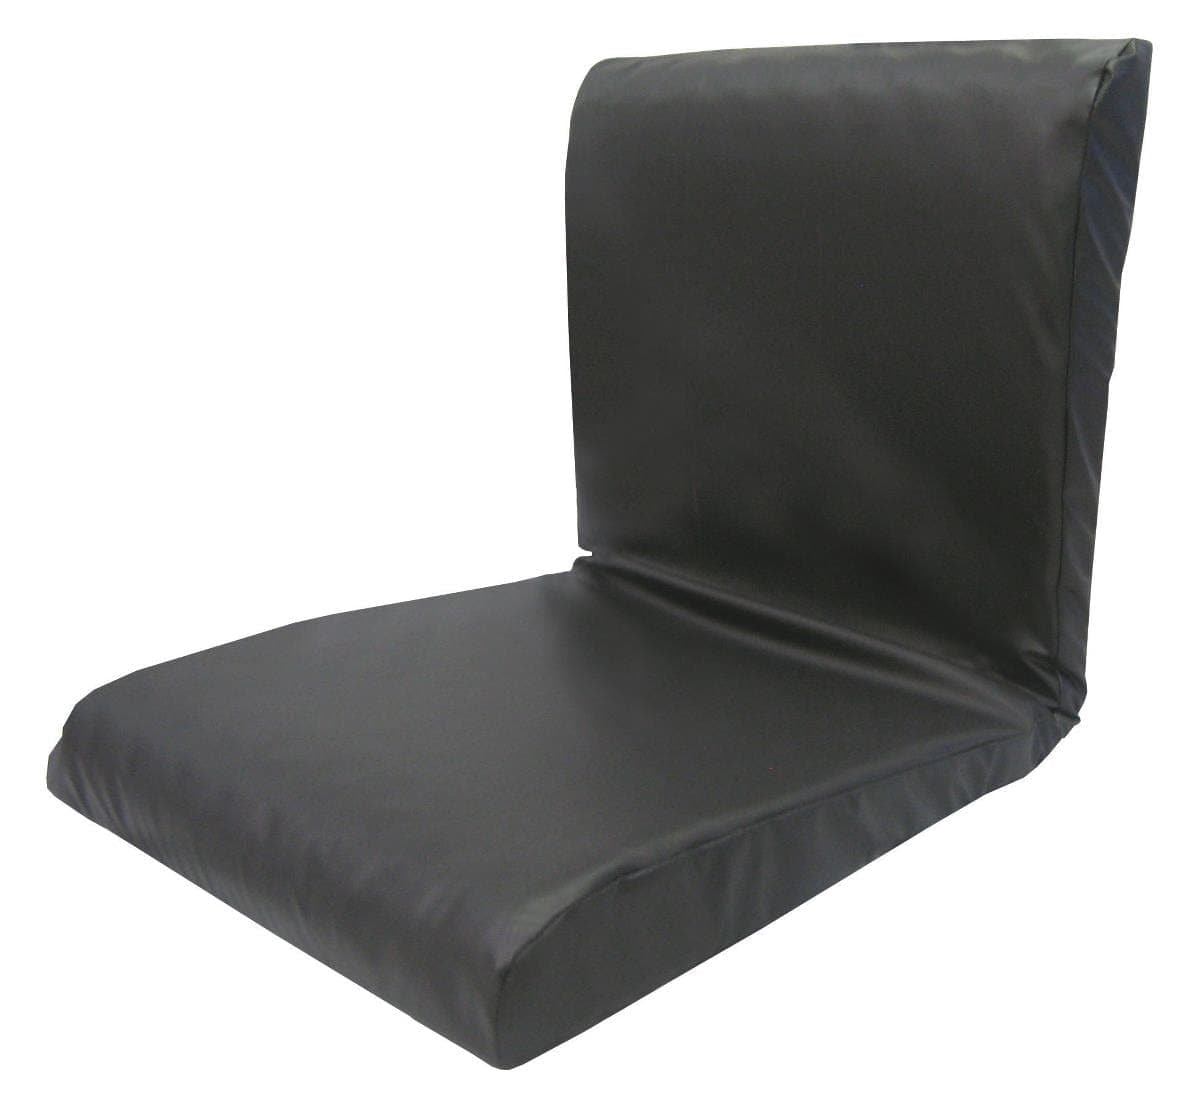 Medline 20"X18" Medline Therapeutic Foam Seat and Back Cushion